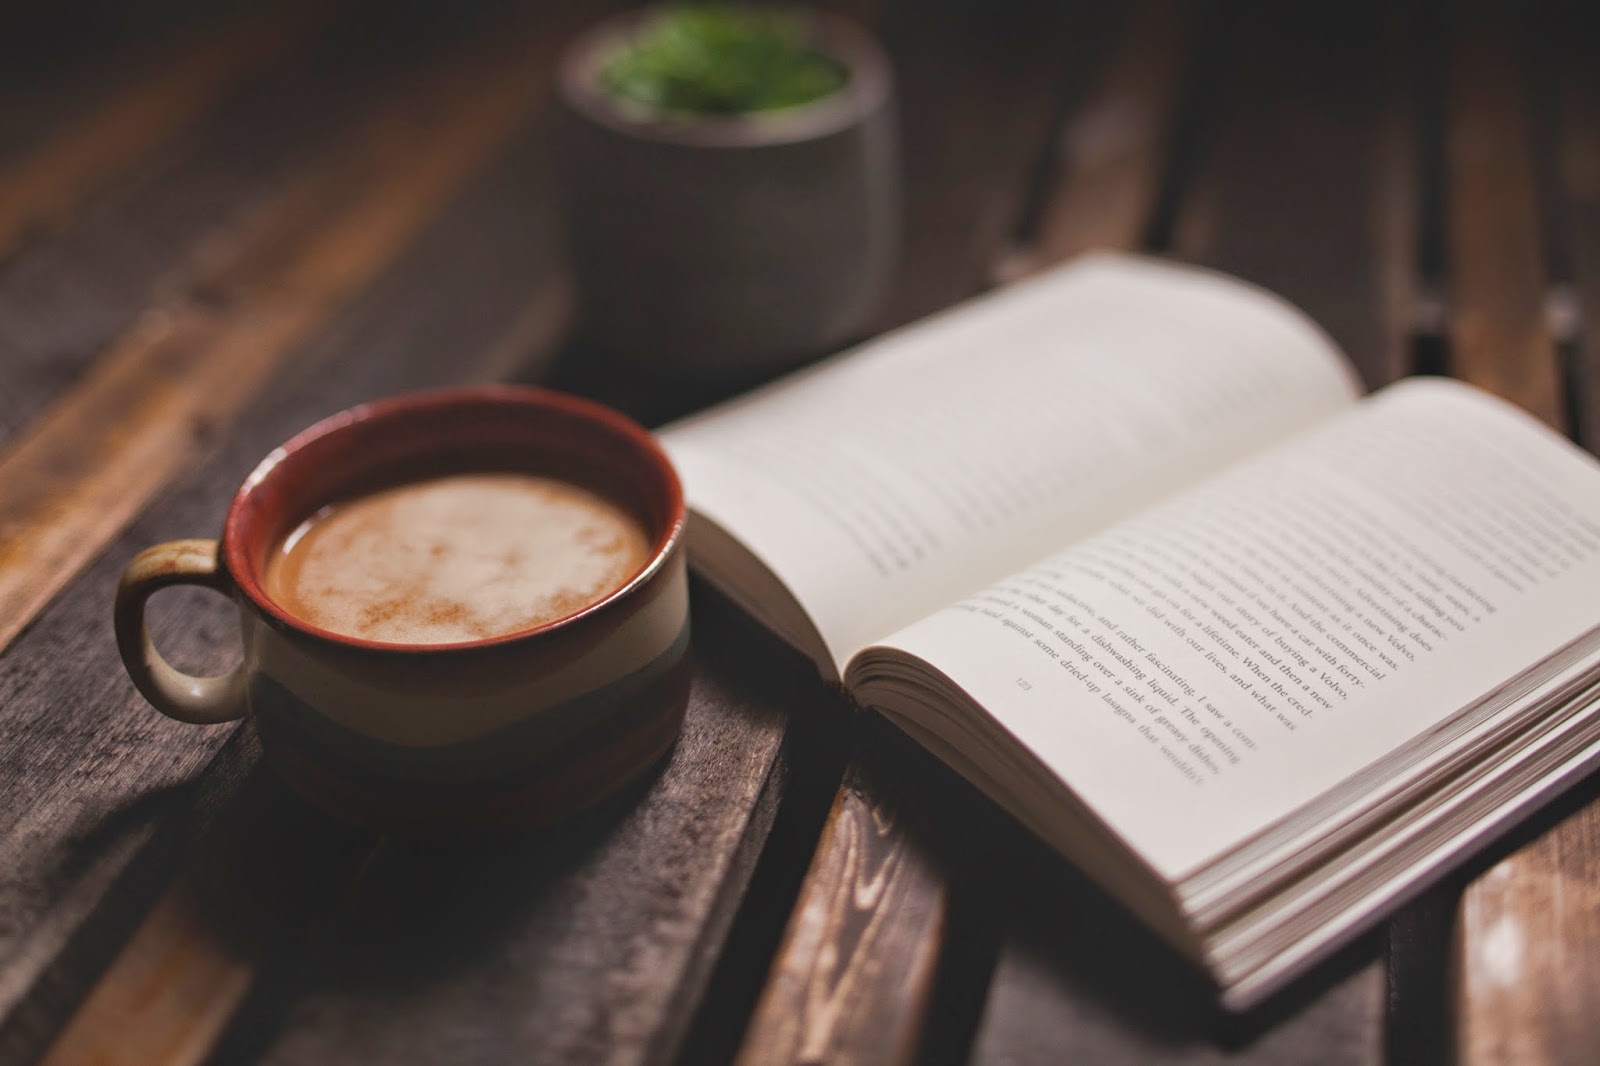 An image of a coffee filled mug next to a book